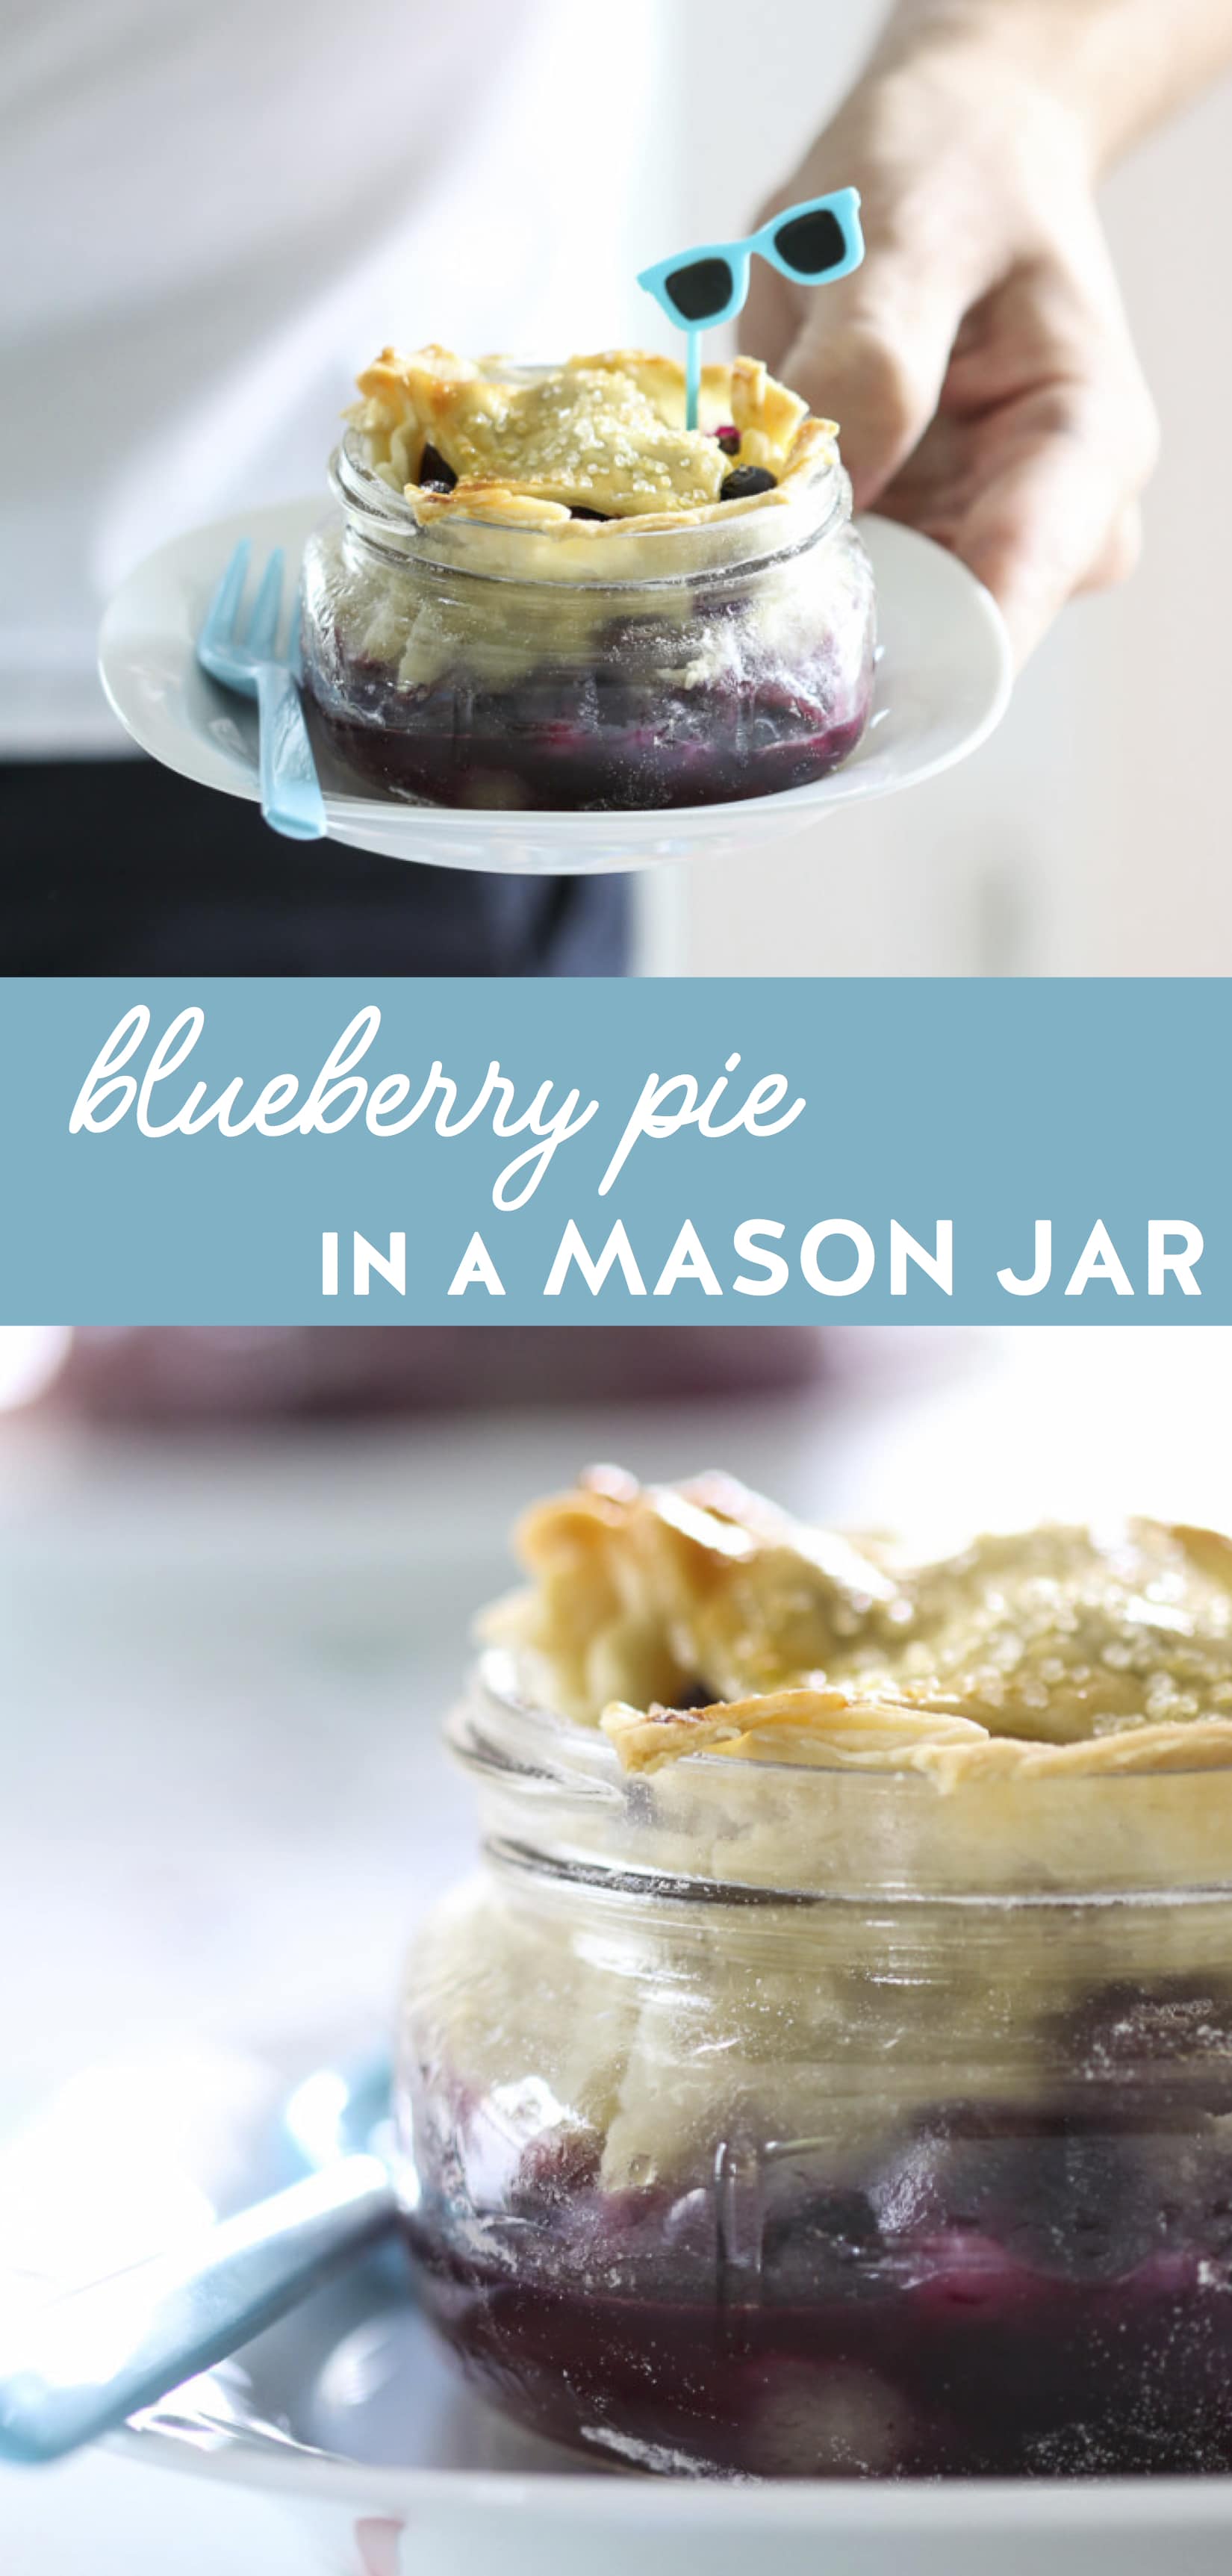 Adorable and Delicious Blueberry Pies in a Mason Jar! #pie #blueberry #mason #jar #recipe